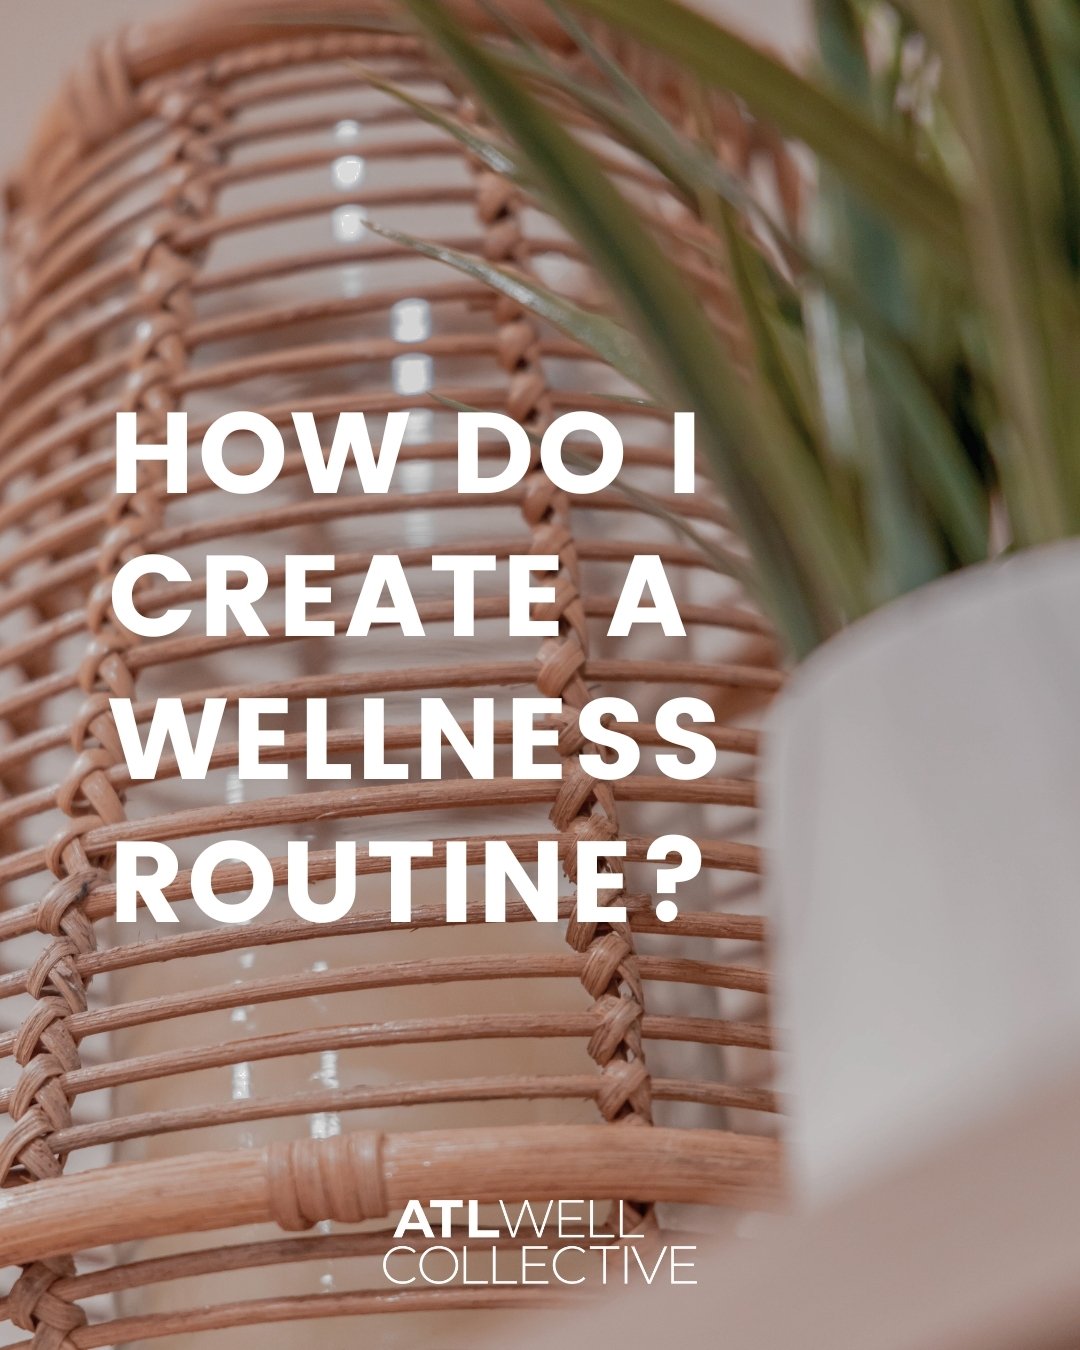 Swipe ➡️ to discover how to create a wellness routine.

#atlwell #livelifewell